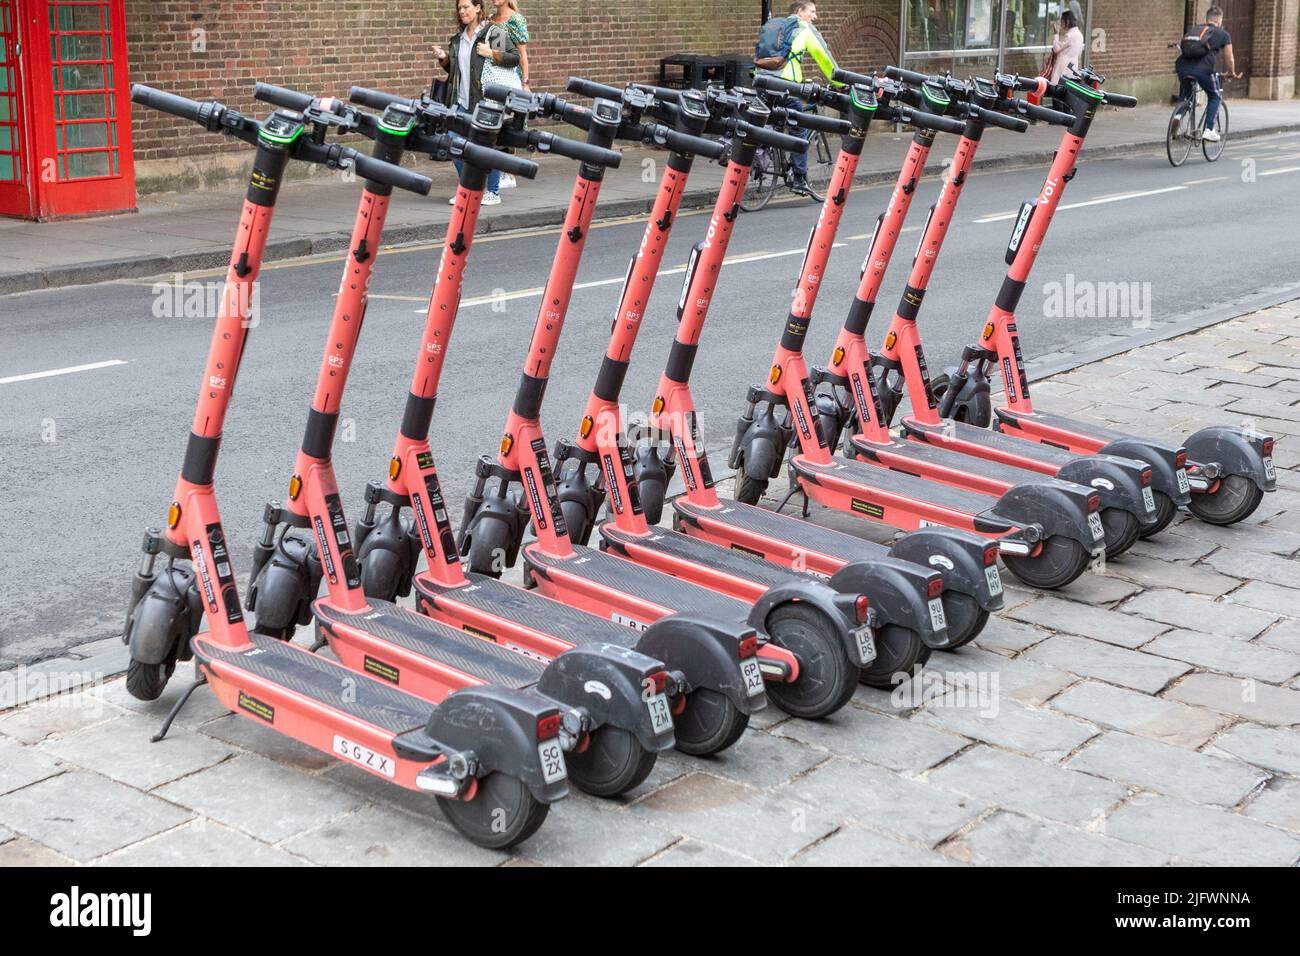 Electric scooters packed in a row on a pavement in Cambridge, UK.   Image shot on 29th June 2022.  © Belinda Jiao   jiao.bilin@gmail.com 07598931257 h Stock Photo